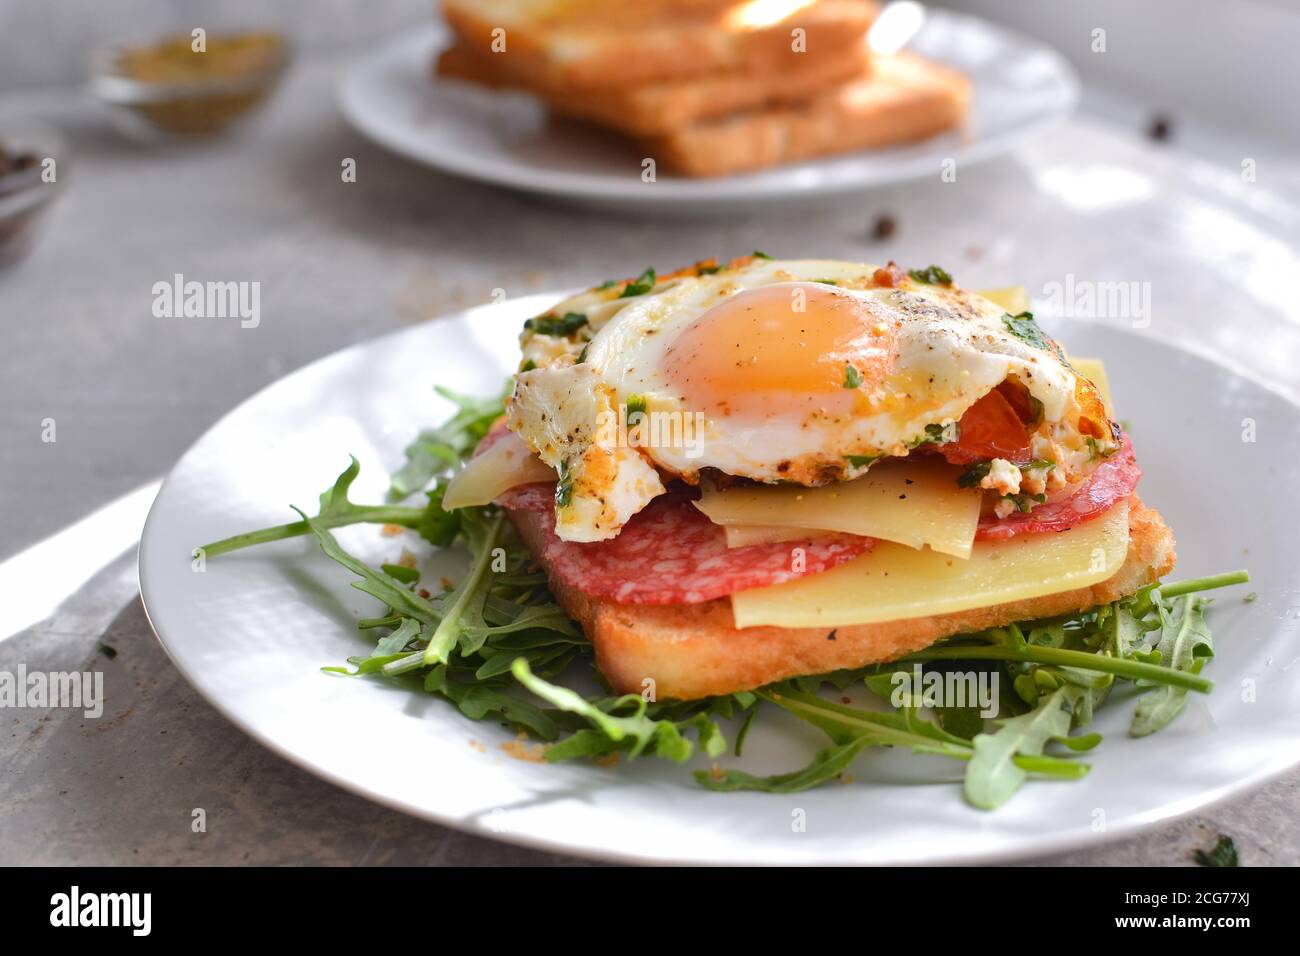 Tasty breakfast. Toast with egg, cheese and sausage. Sandwich in a white plate with arugula. Light background. Closeup Stock Photo